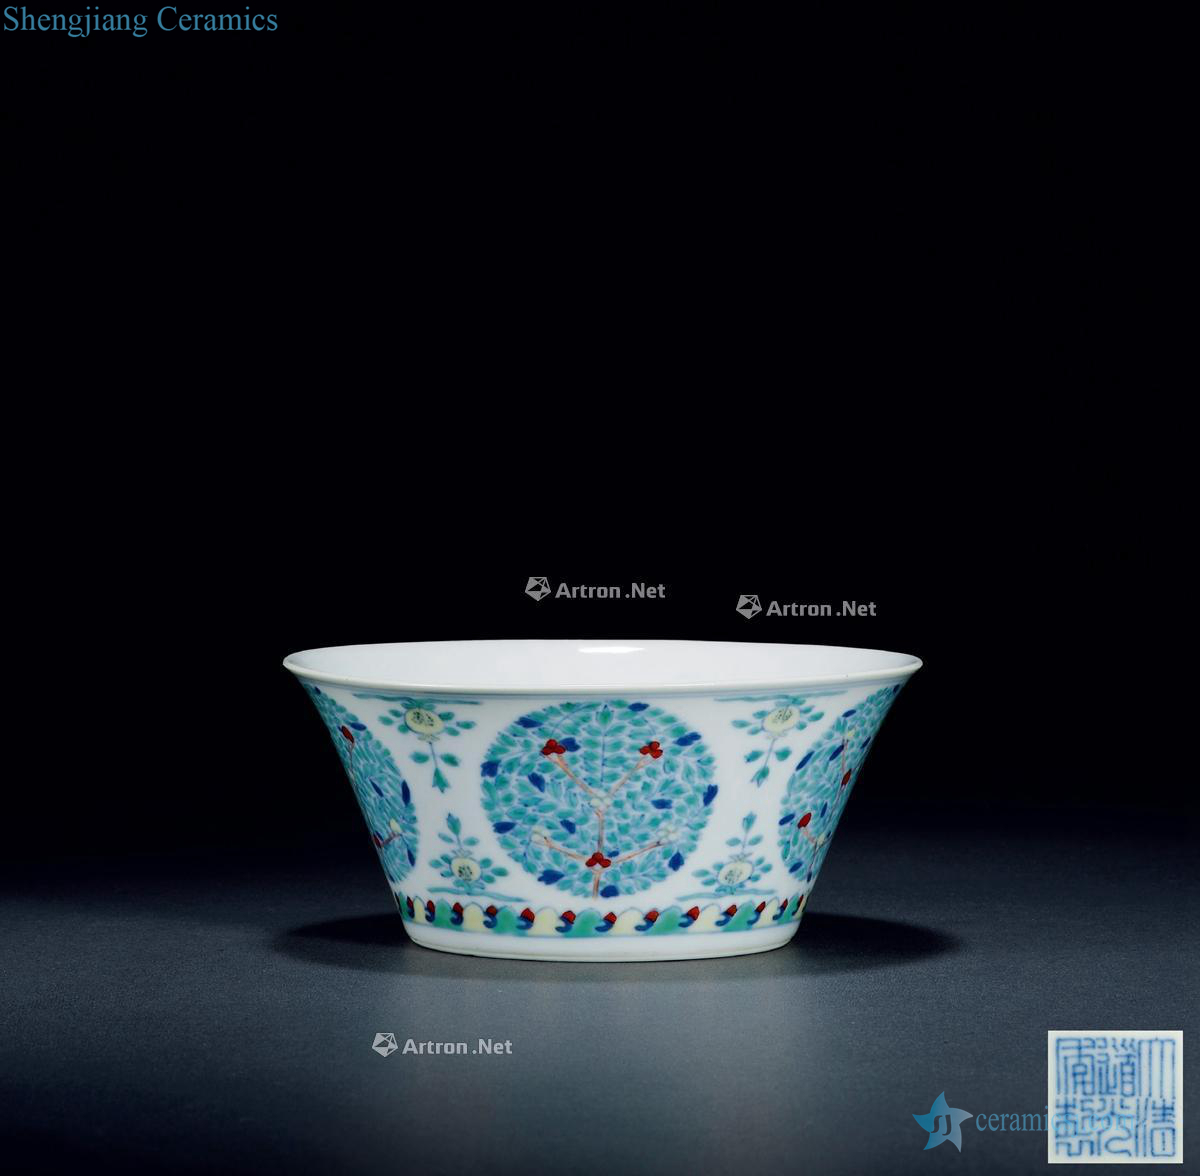 Qing daoguang, bucket color flower tattoos horseshoe bowl